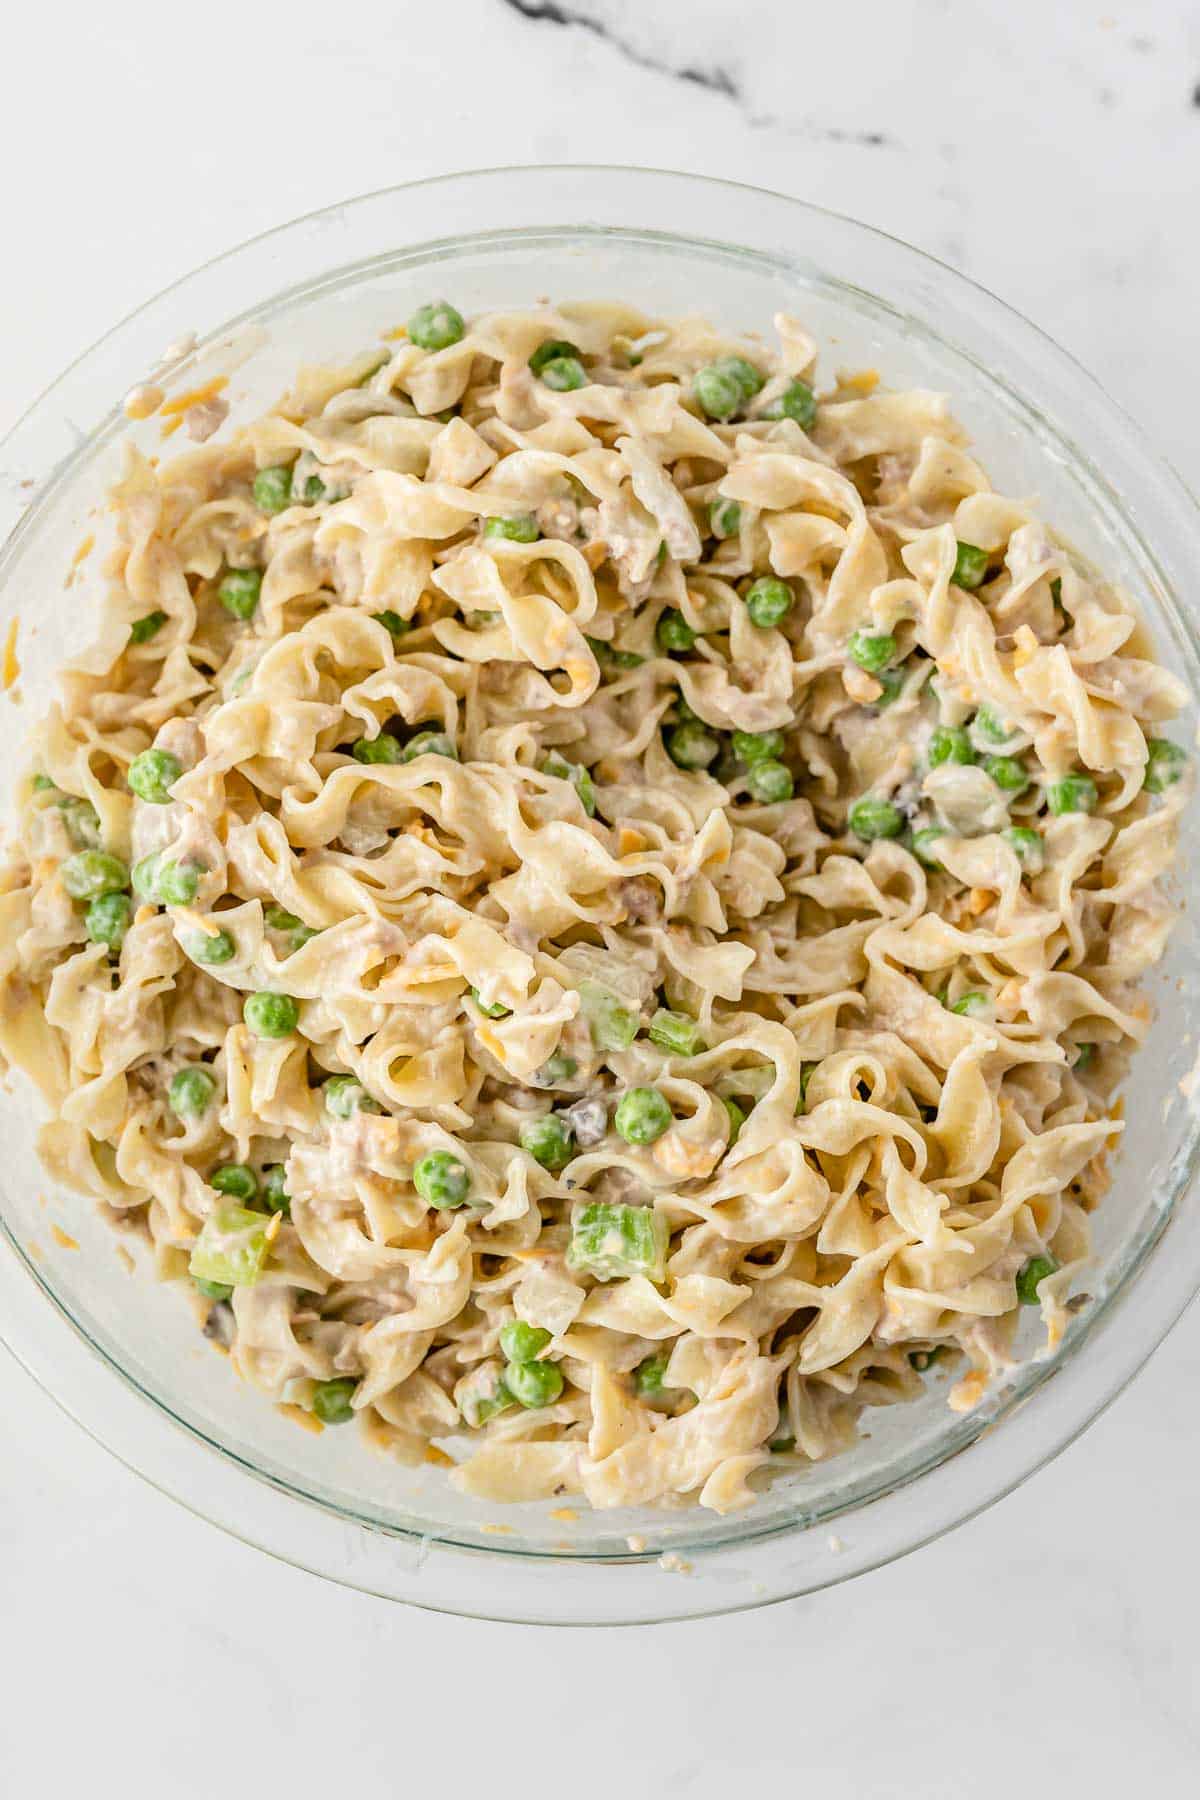 egg noodles mixed in creamy soup and peas mixture in a big glass bowl.